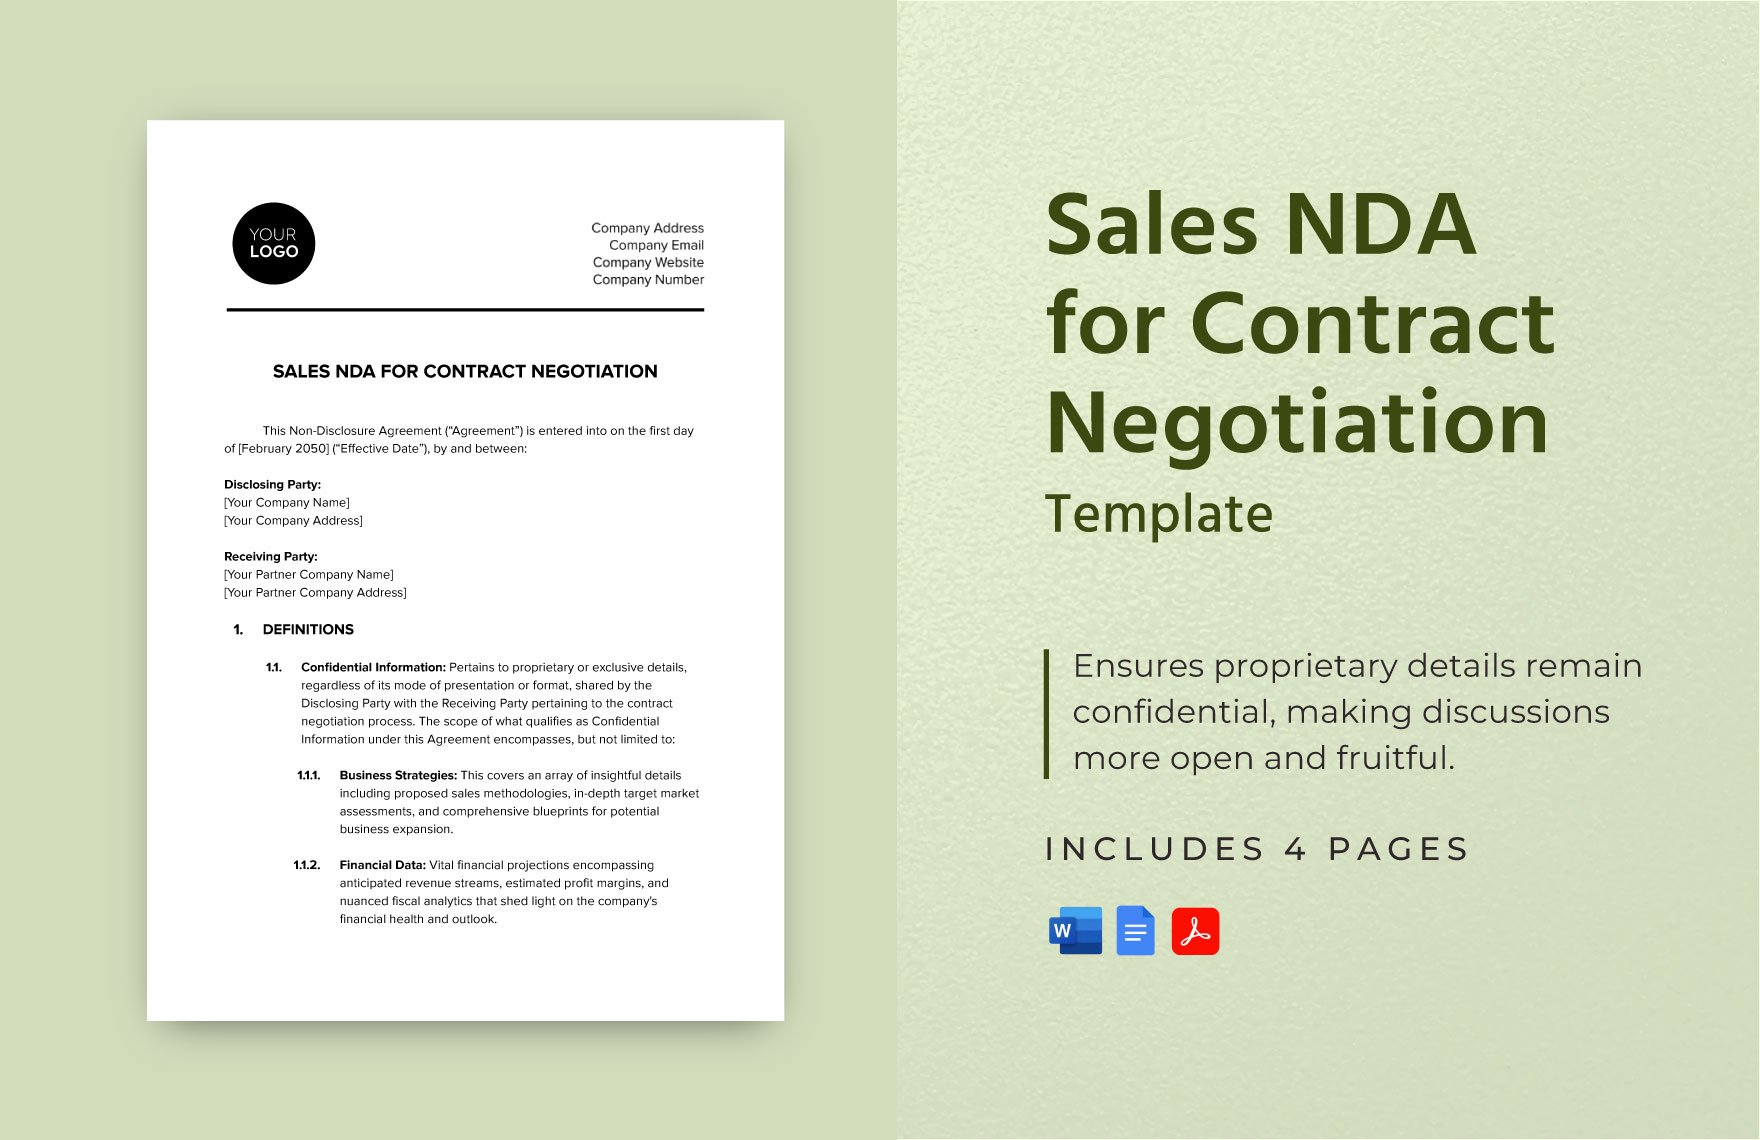 Sales NDA for Contract Negotiation Template in Word, Google Docs, PDF